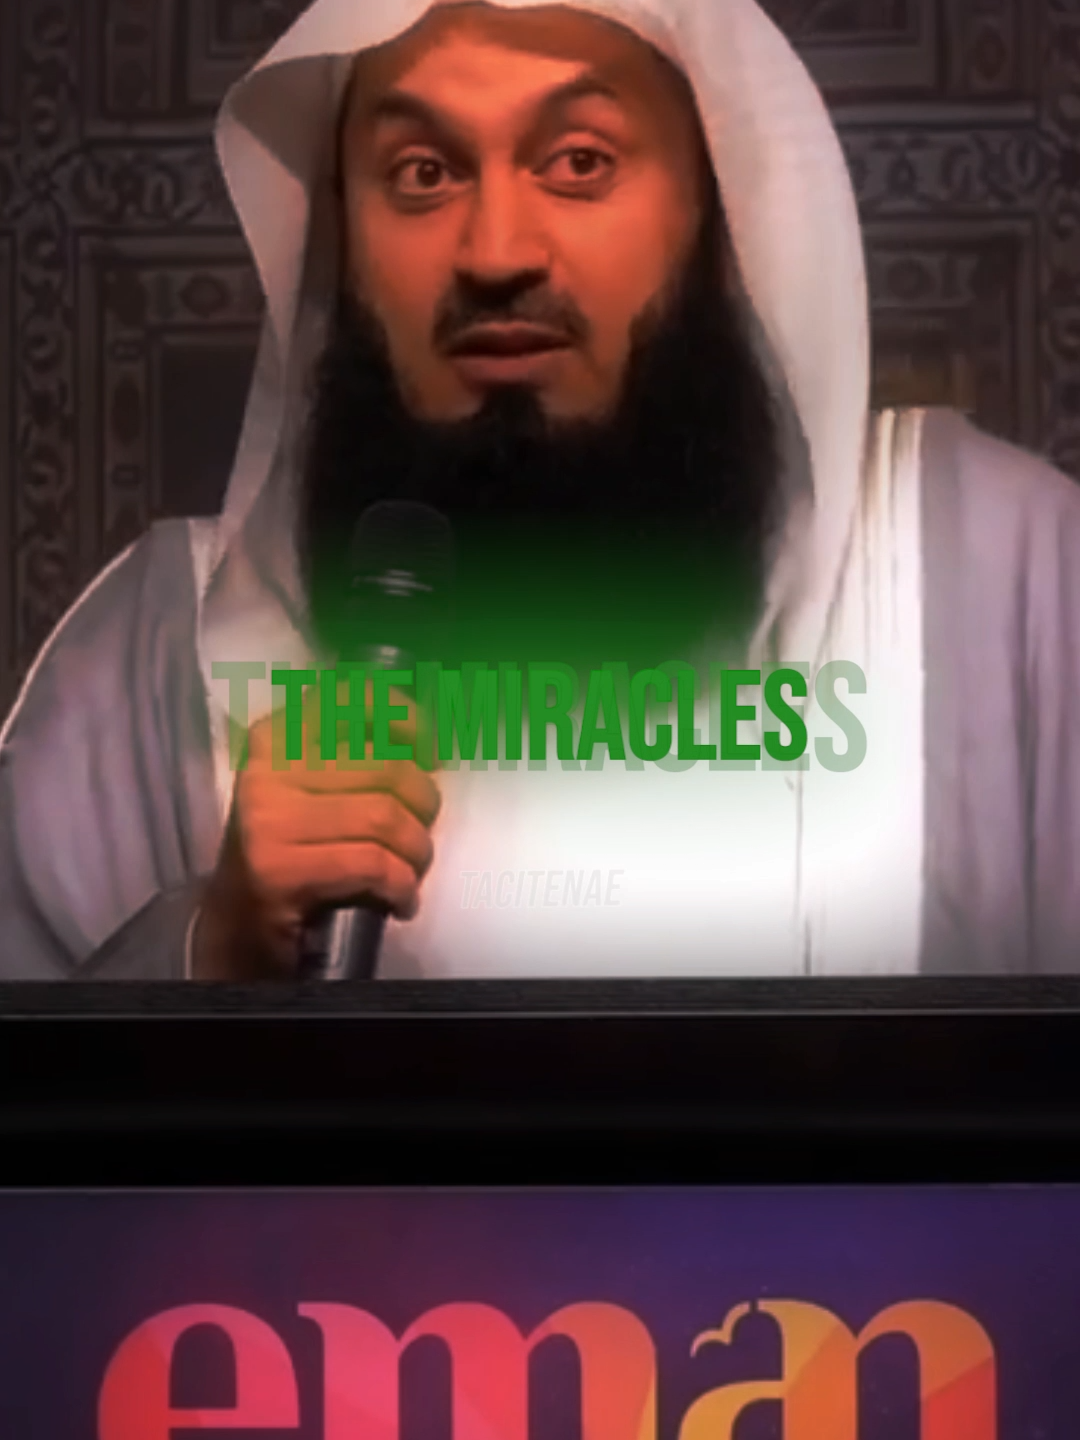 Hold On To It. Speaker: #muftimenk  #islam #islamic_video #strong #muslim #fypppp